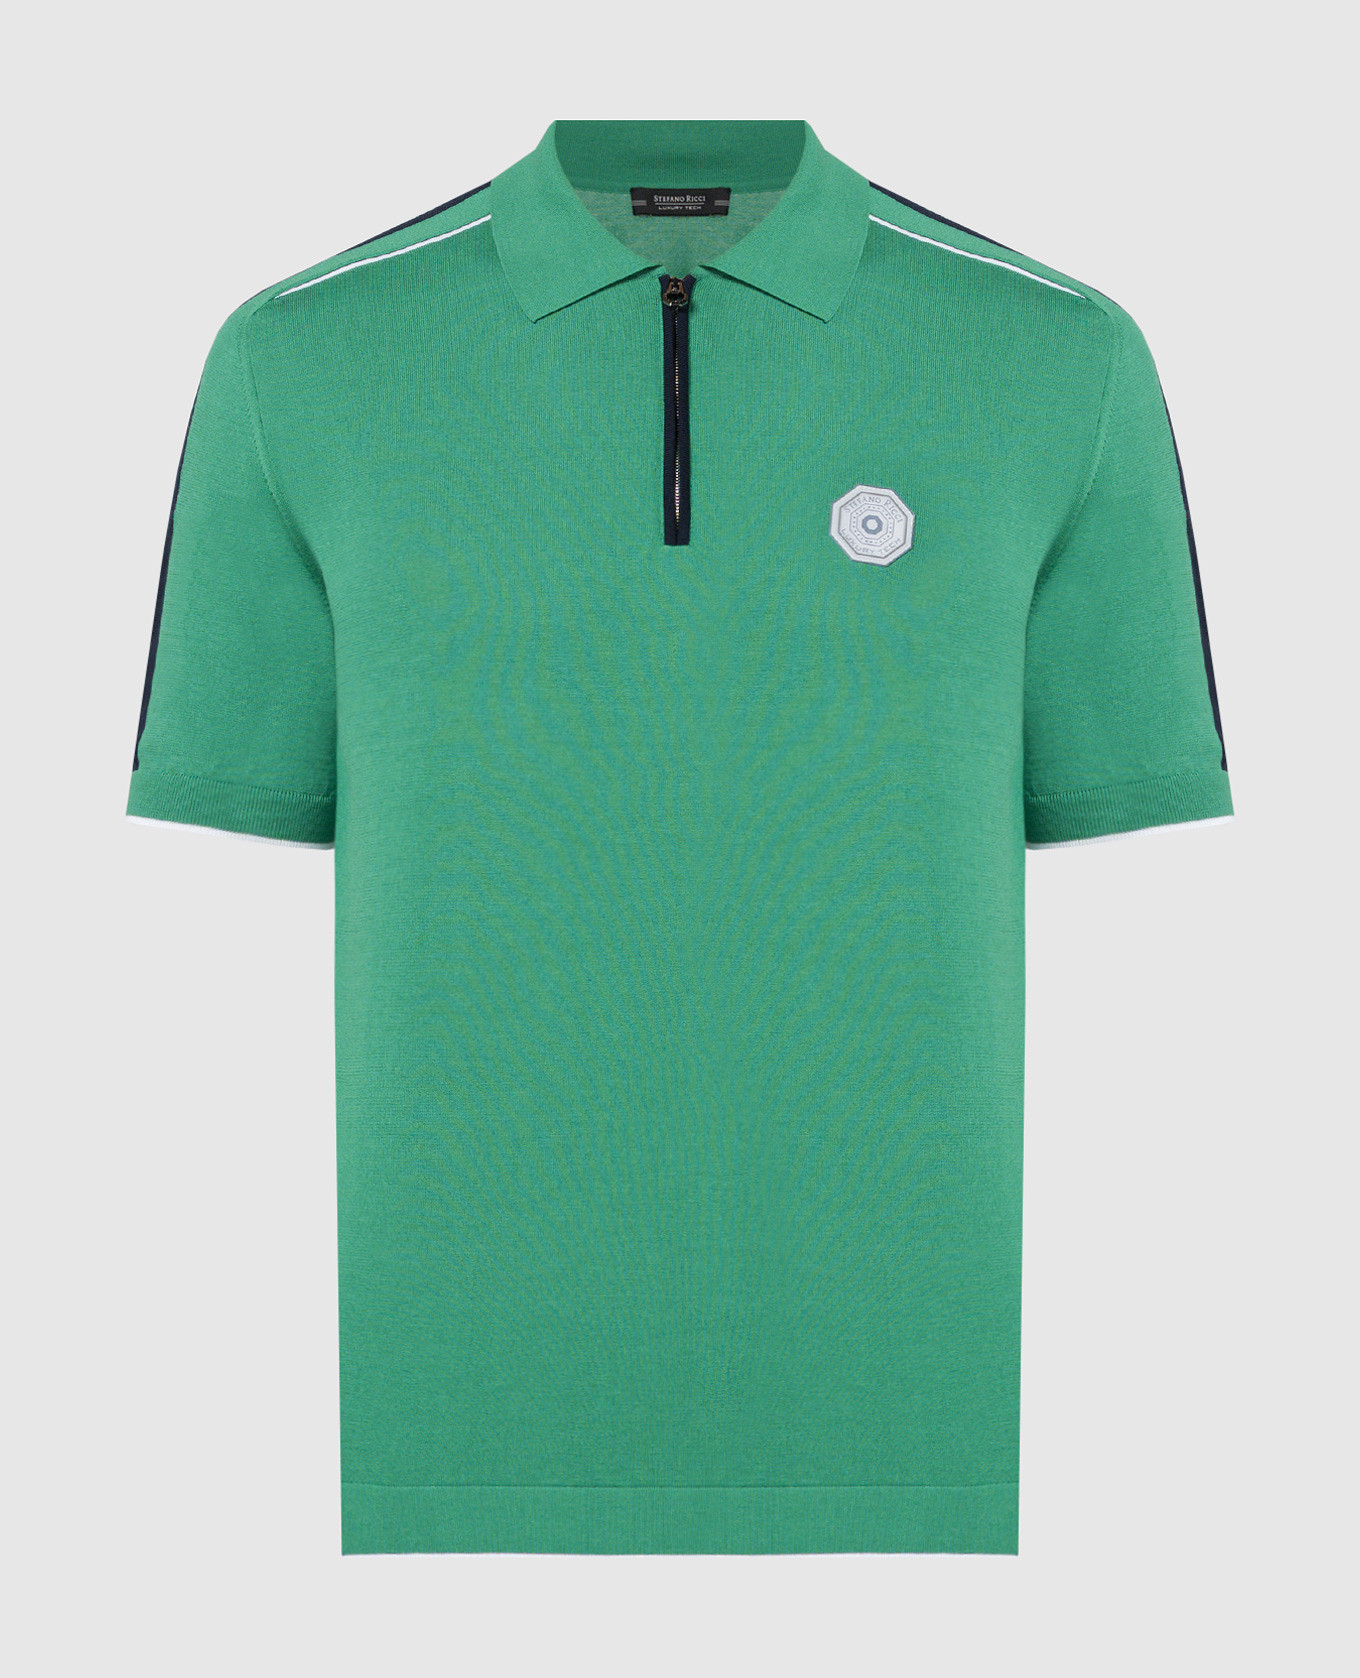 Green polo shirt with logo patch